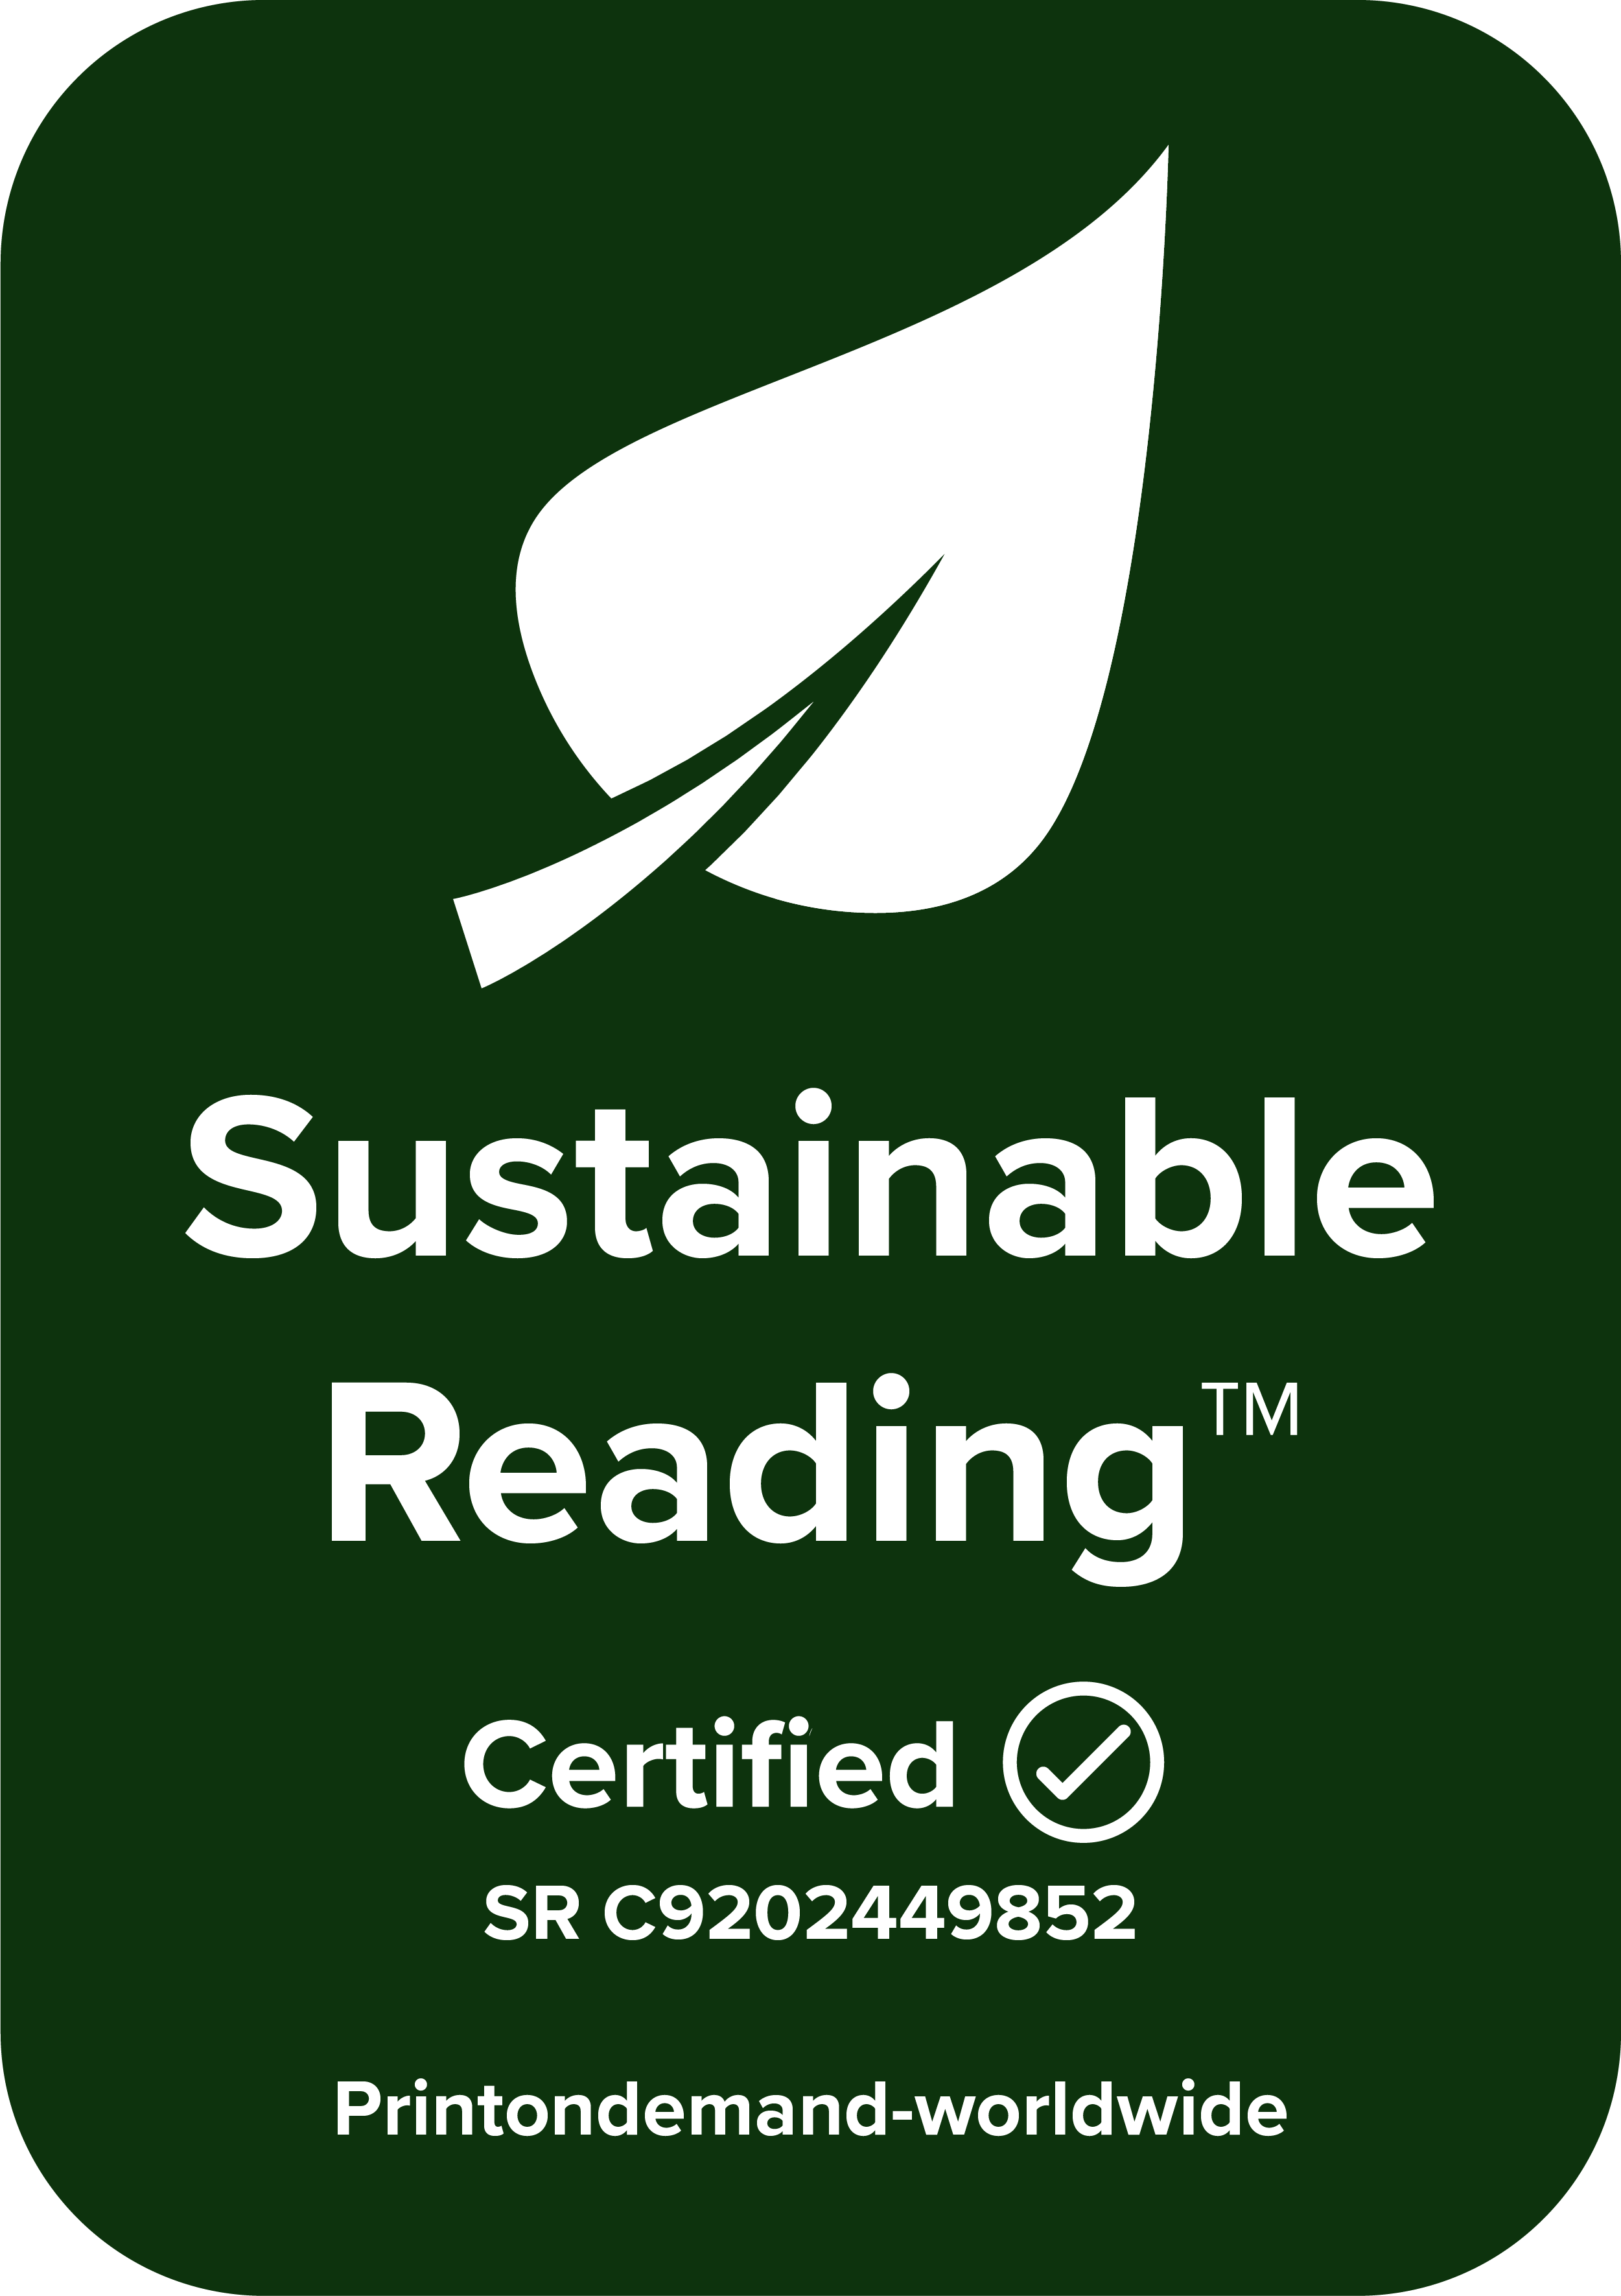 Sustainable Reading Certification